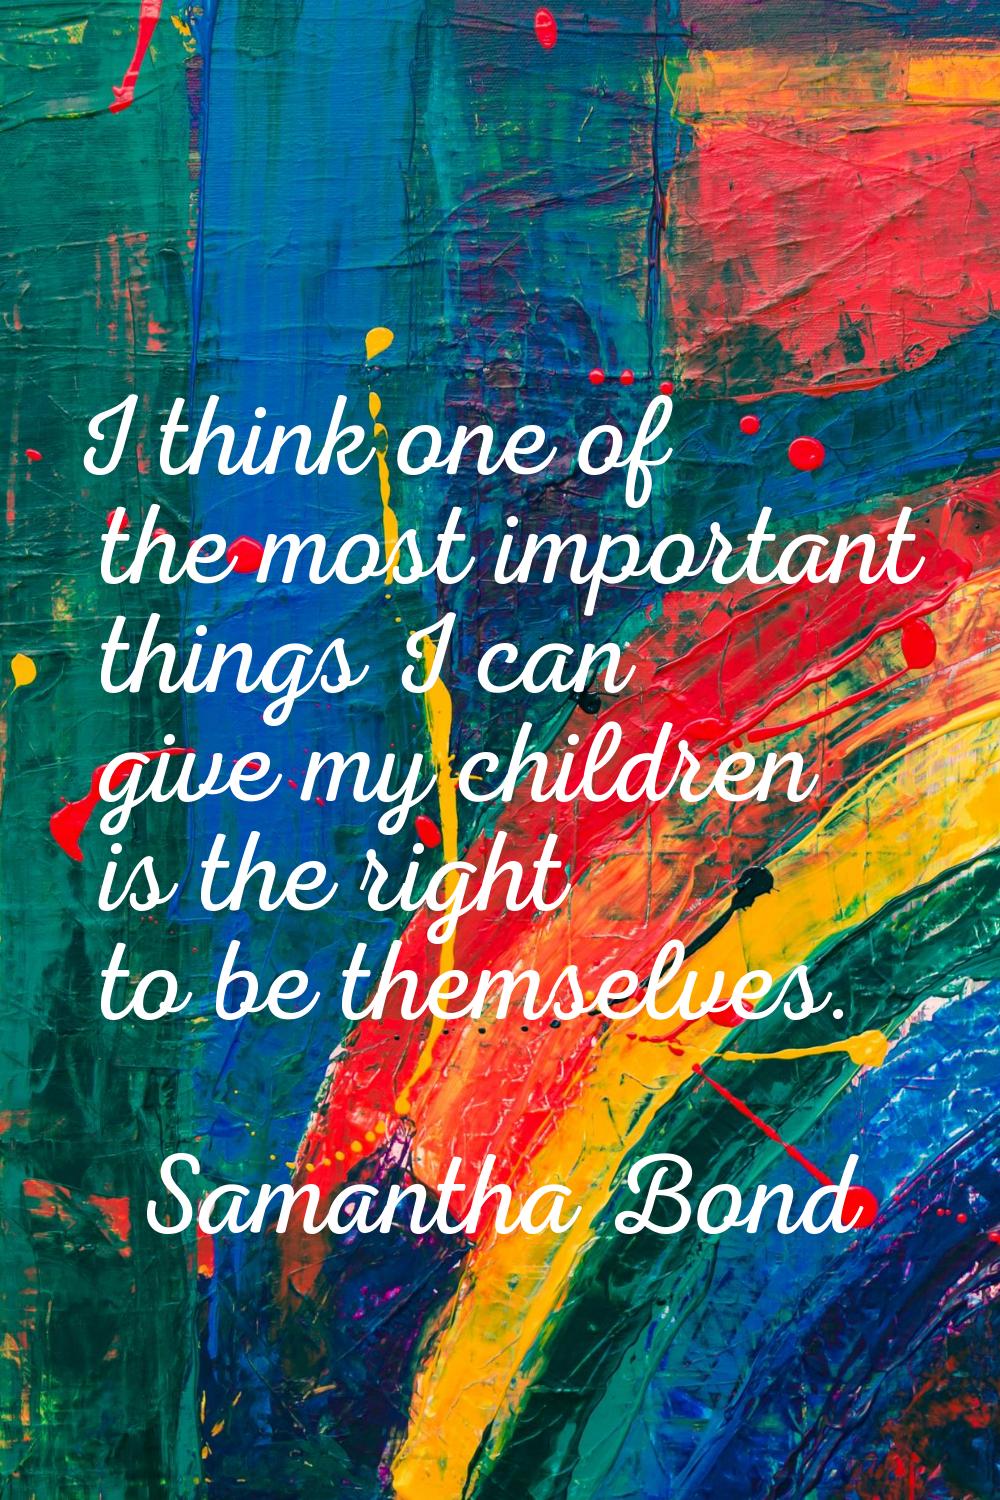 I think one of the most important things I can give my children is the right to be themselves.